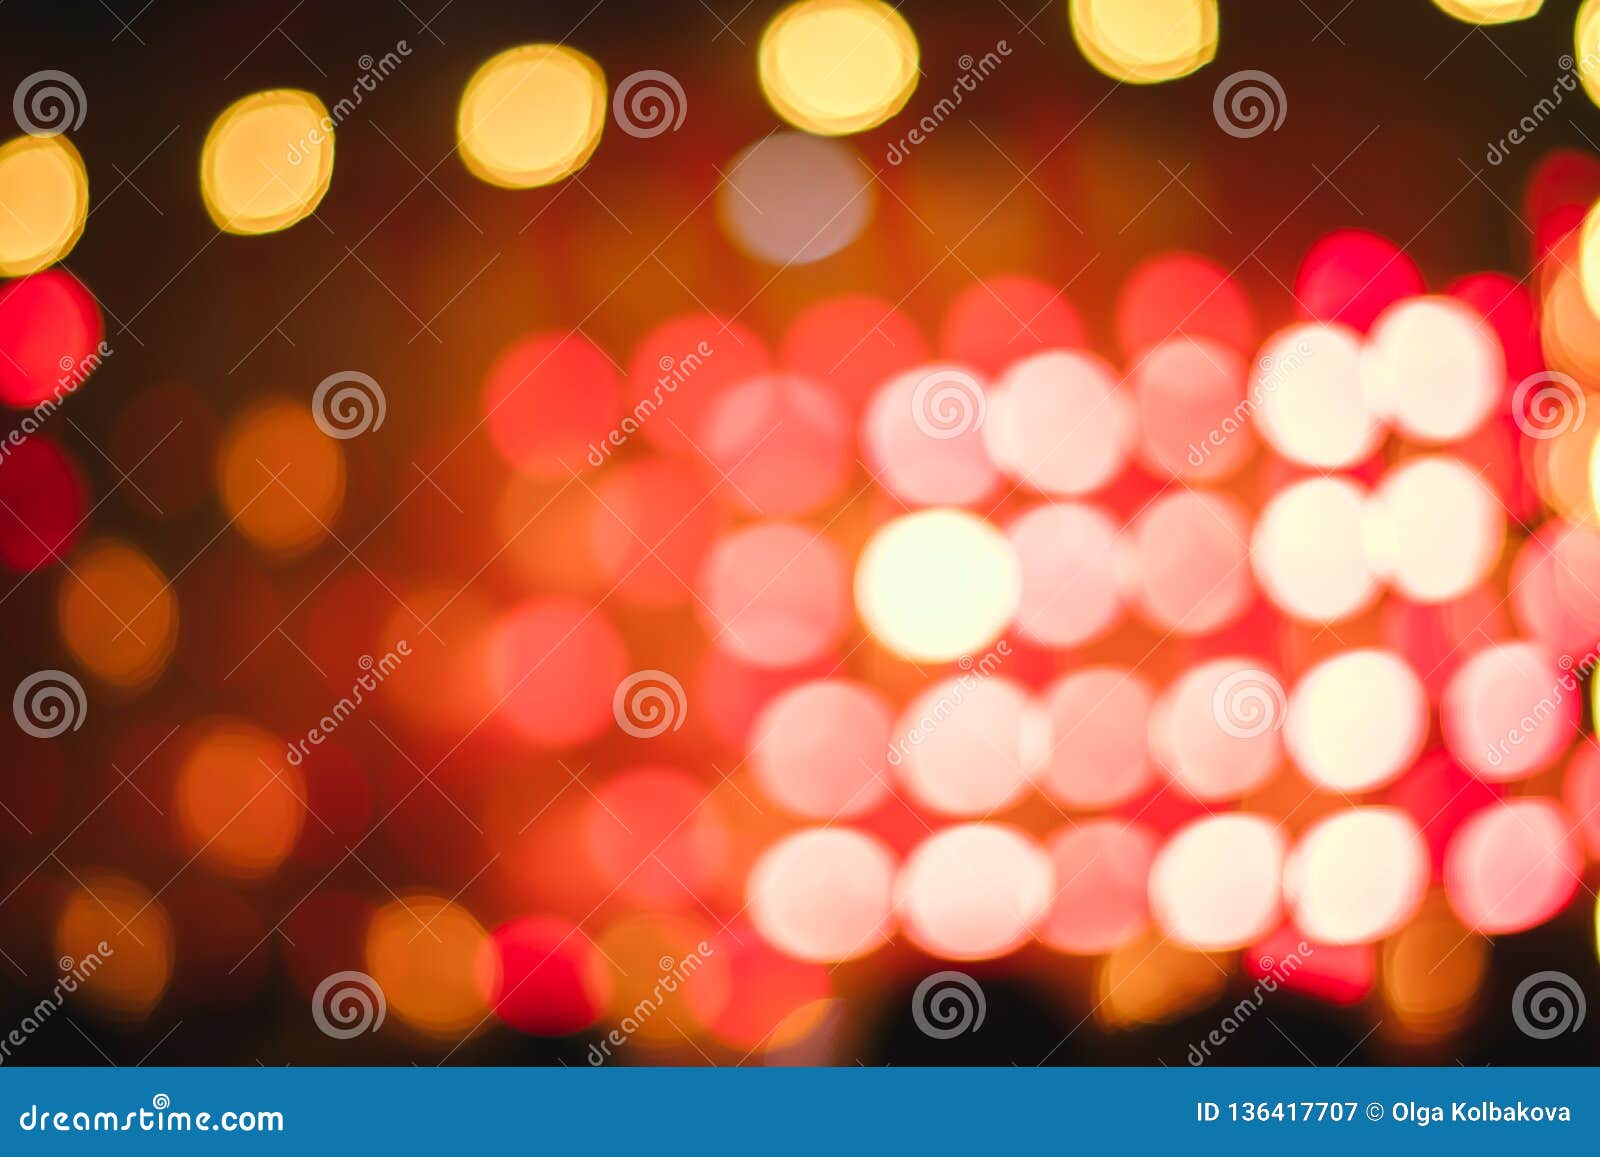 Searchlights at a concert stock image. Image of event - 136417707